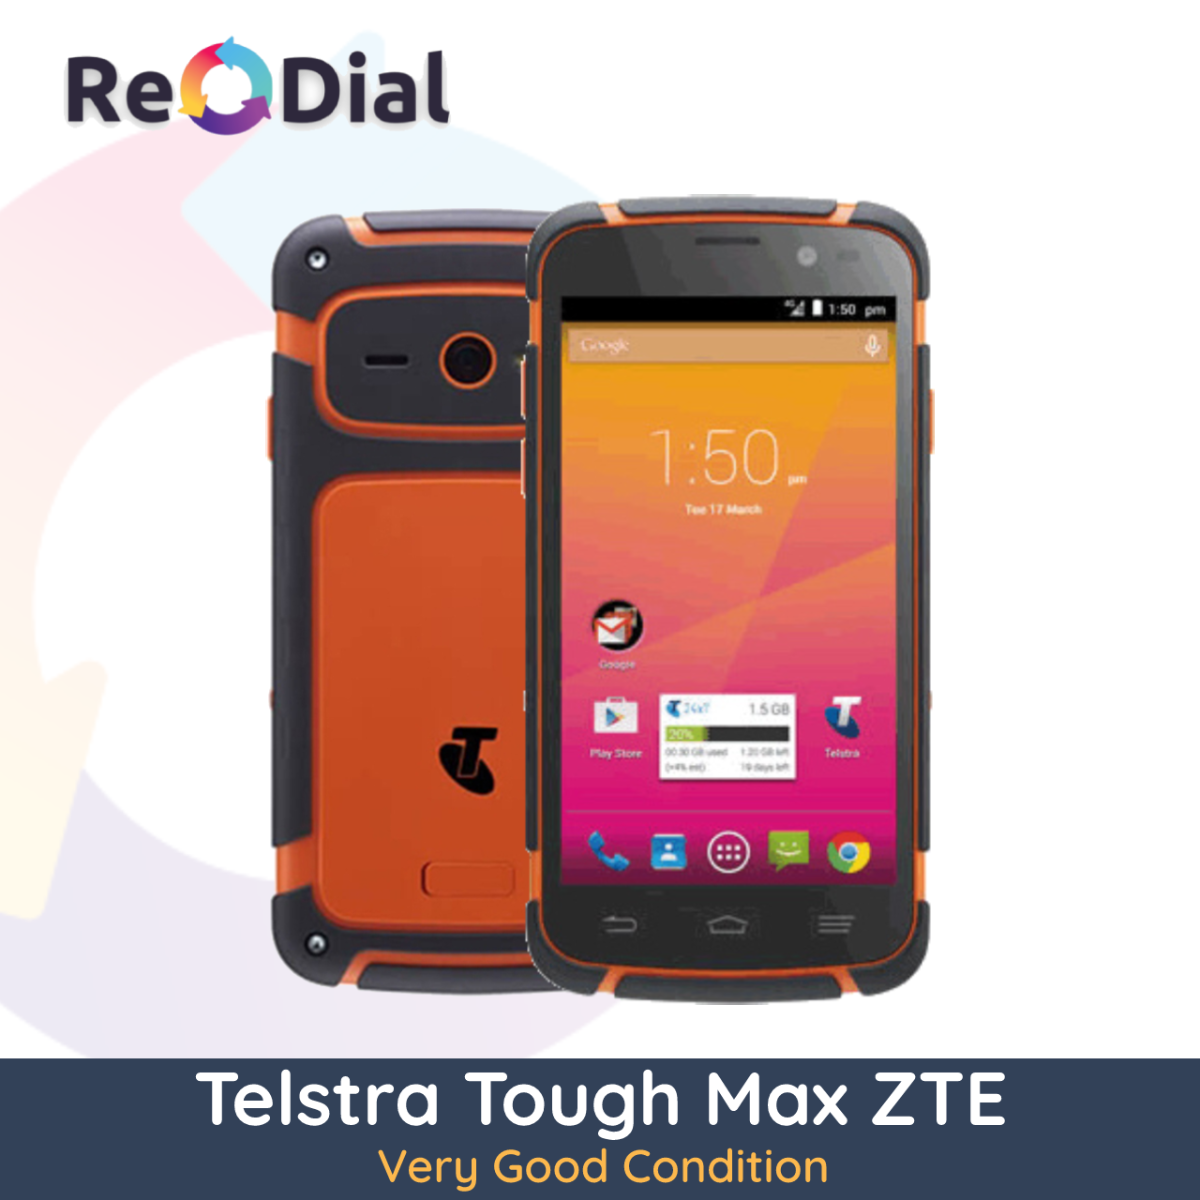 Telstra Tough Max ZTE T84 - Very Good Condition